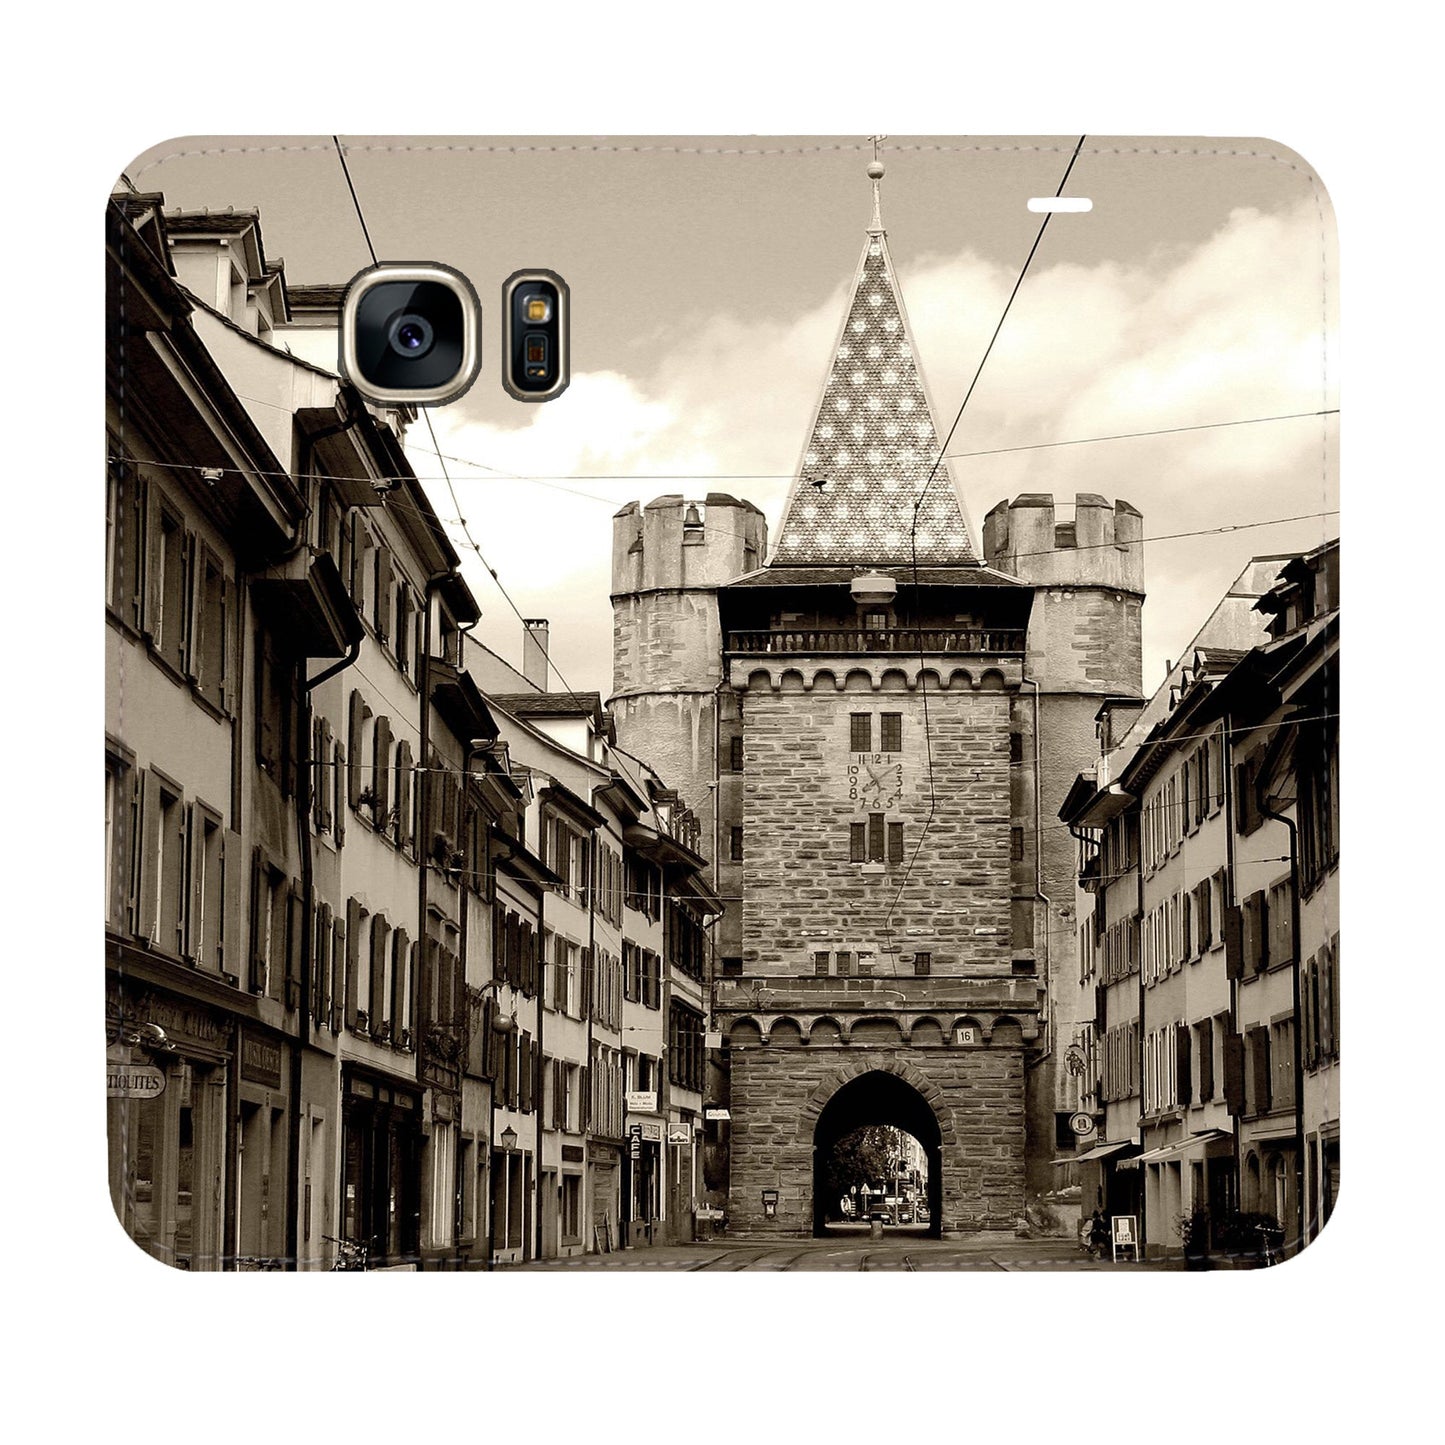 Basel City Spalentor Panorama Case for Samsung Galaxy S7